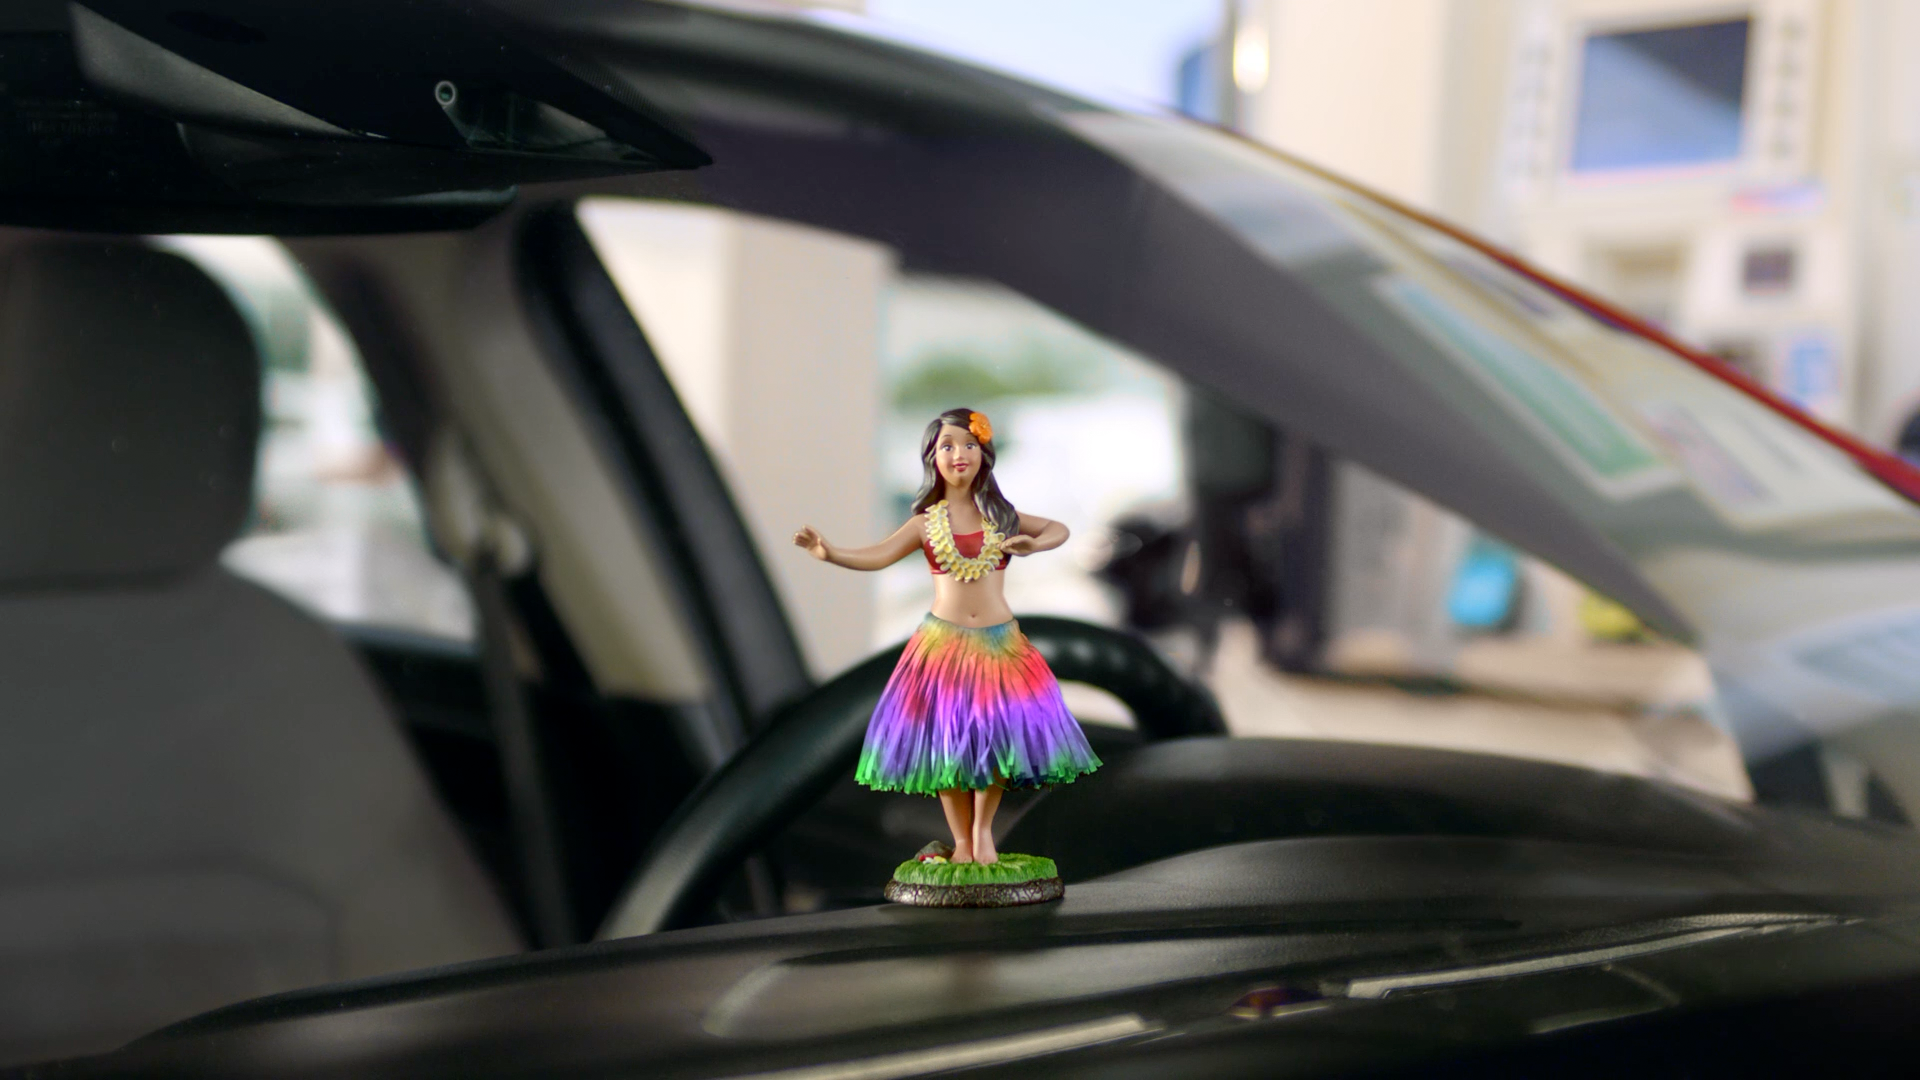 Dashboard Hula Girl ‘Hanna’ Brings Her Sunny Personality to Gas Brand ARCO